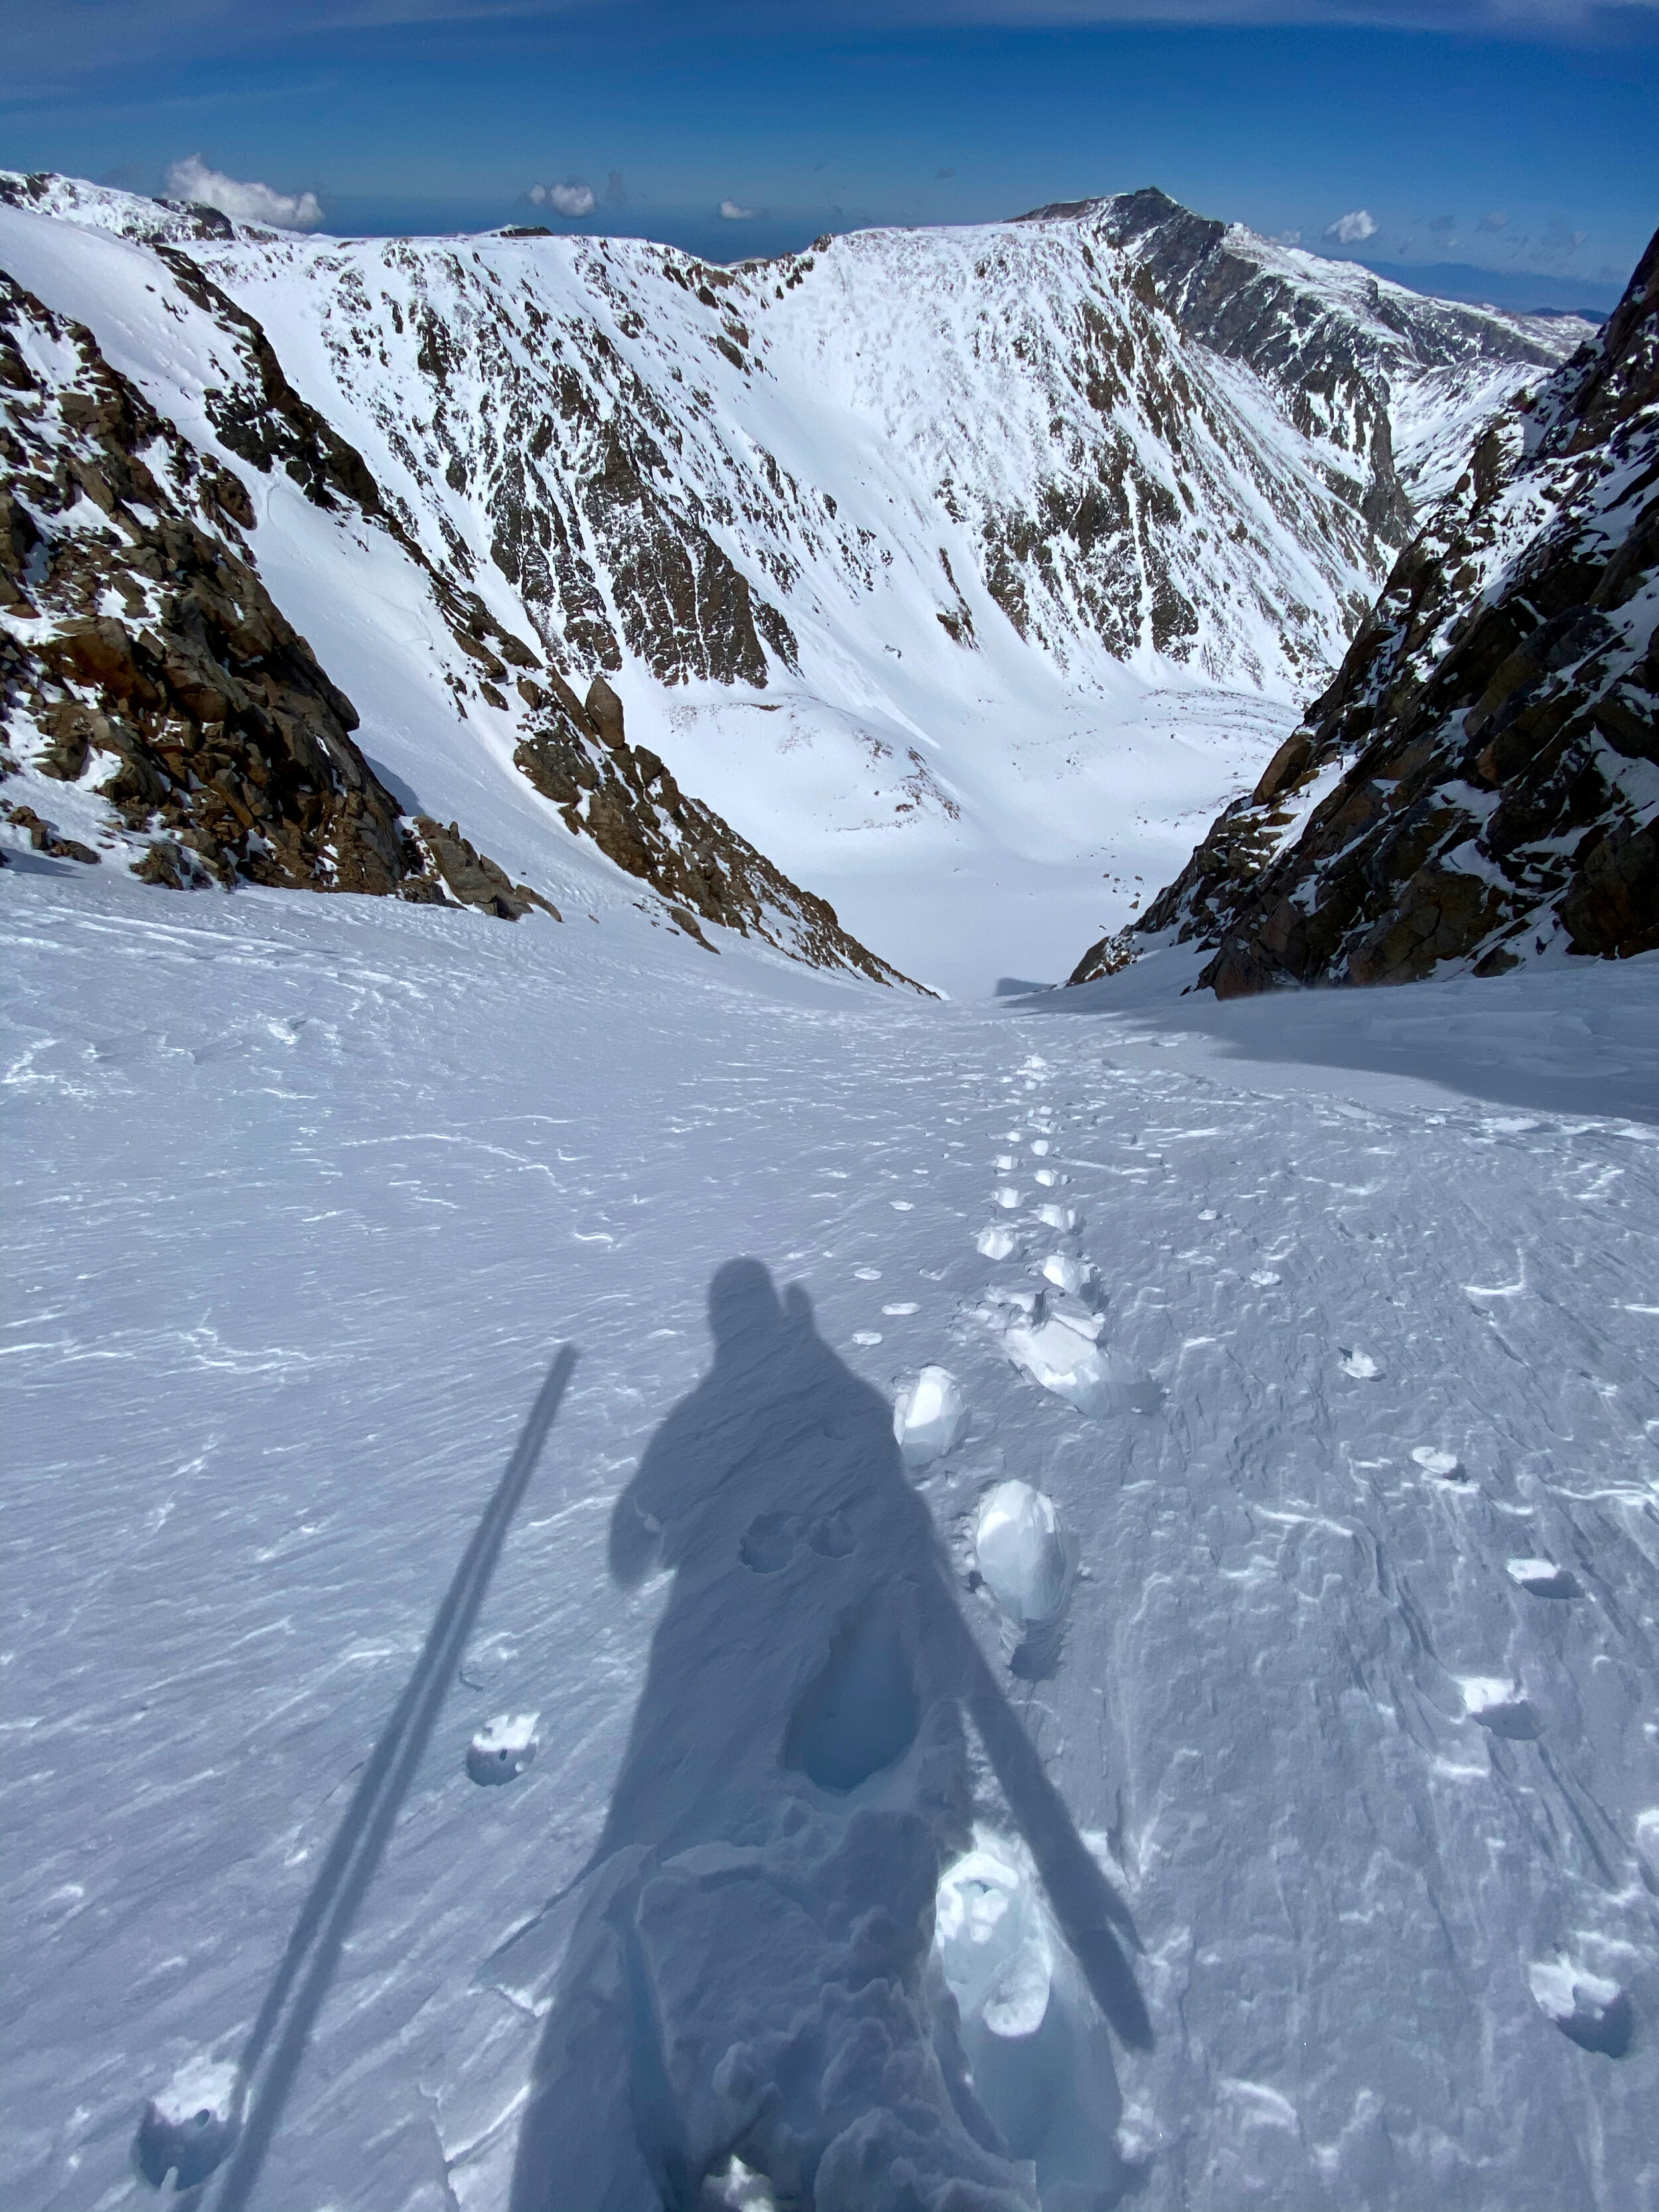 Booting up the East Gully of Castle Peak